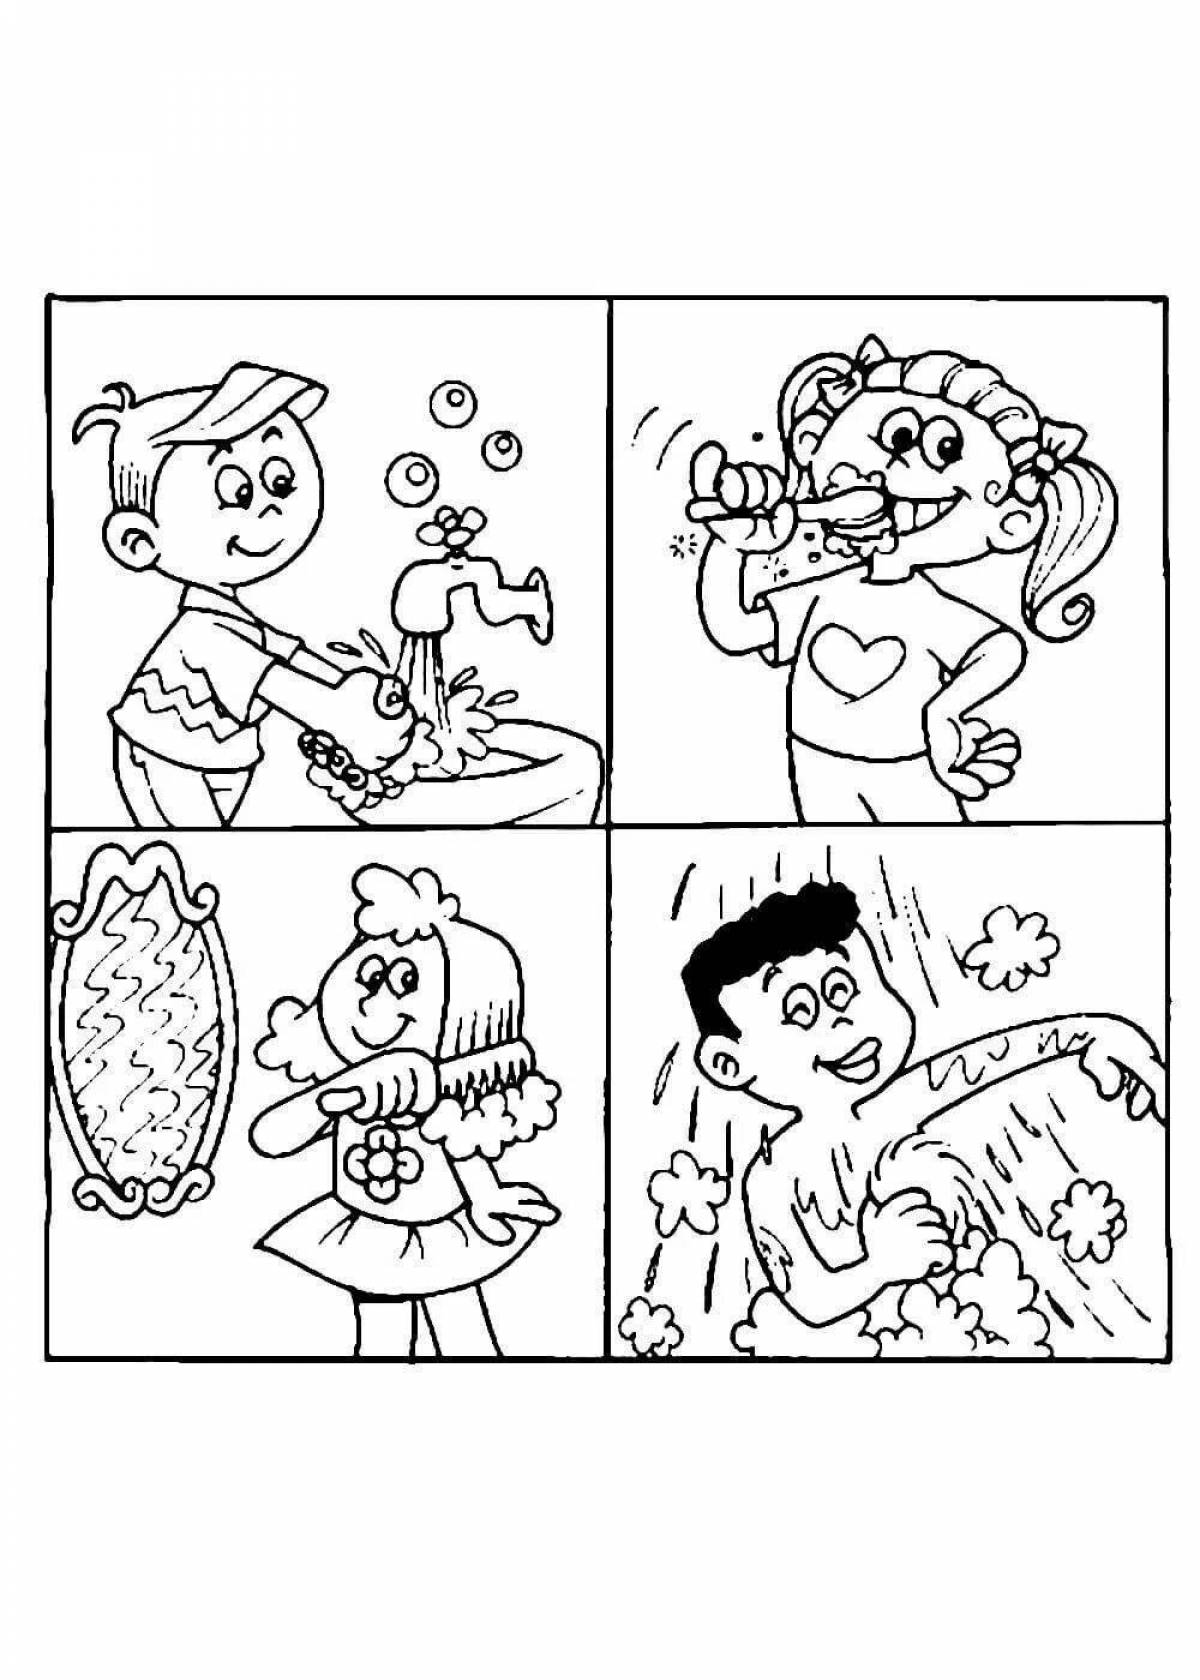 Playful personal care coloring page